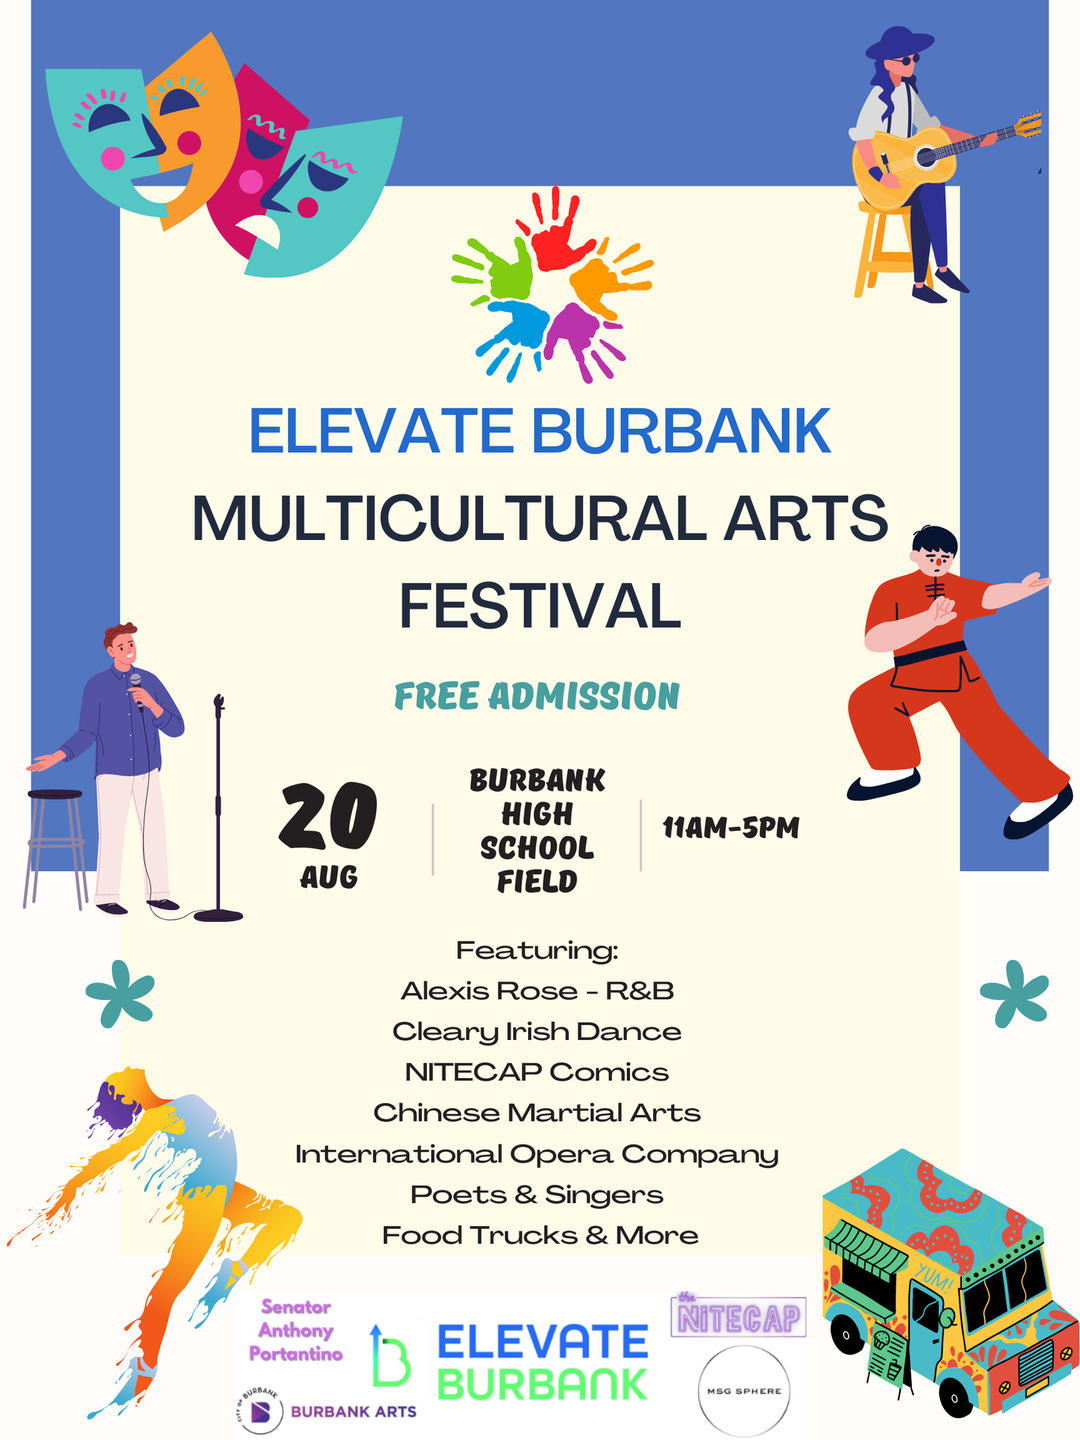 May be an image of 1 person, standing and text that says 'ELEVATE BURBANK MULTICULTURAL ARTS FESTIVAL FREE ADMISSION 20 AUG BURBANK HIGH SCHOOL FIELD 11AM- 11AM-5PM Featuring: Alexis Rose R&B Cleary Irish Dance NITECAP Comics Chinese Martial Arts International Opera Company Poets & Singers Food Trucks & More Senator Anthony Portantino M m NITECAP ELEVATE BURBANK BURBANK ARTS MSGSPHERE'